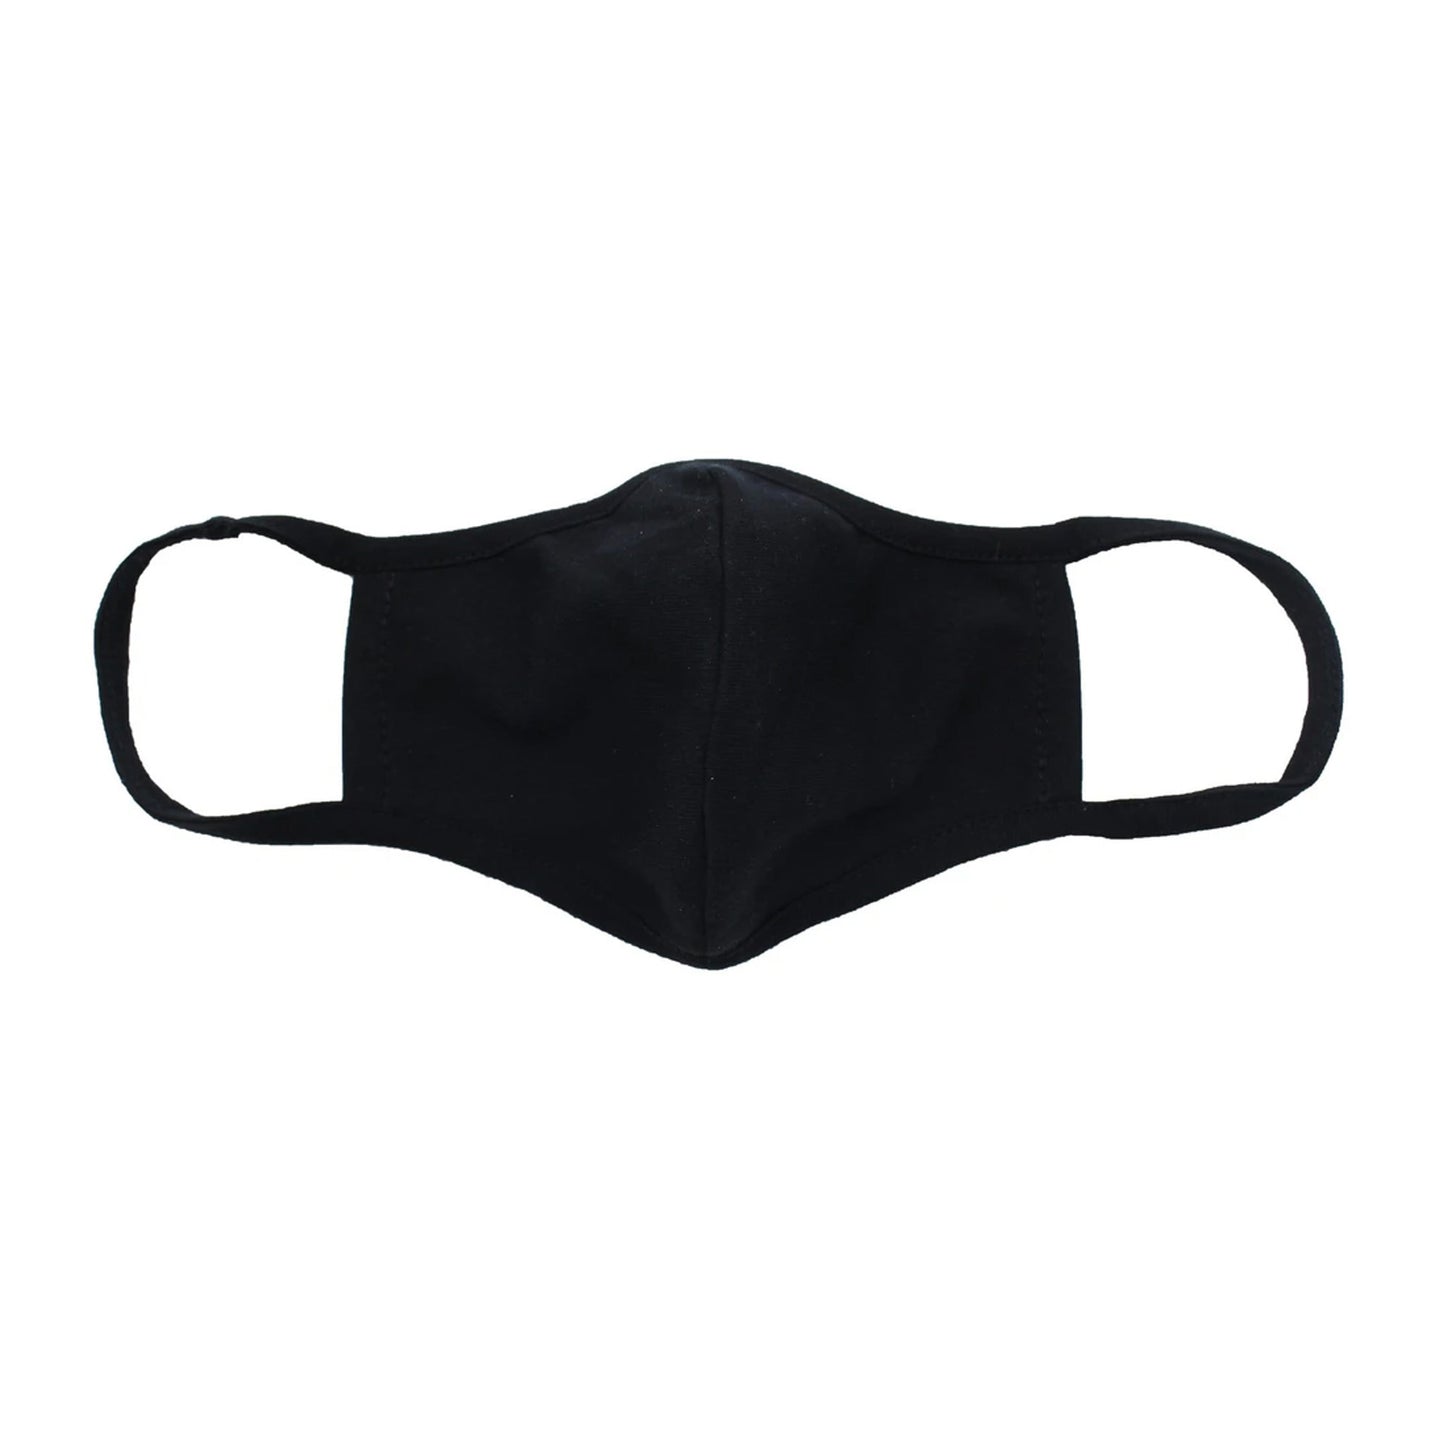 Ready First Aid Black Reusable Face Mask - Large - 15-07663